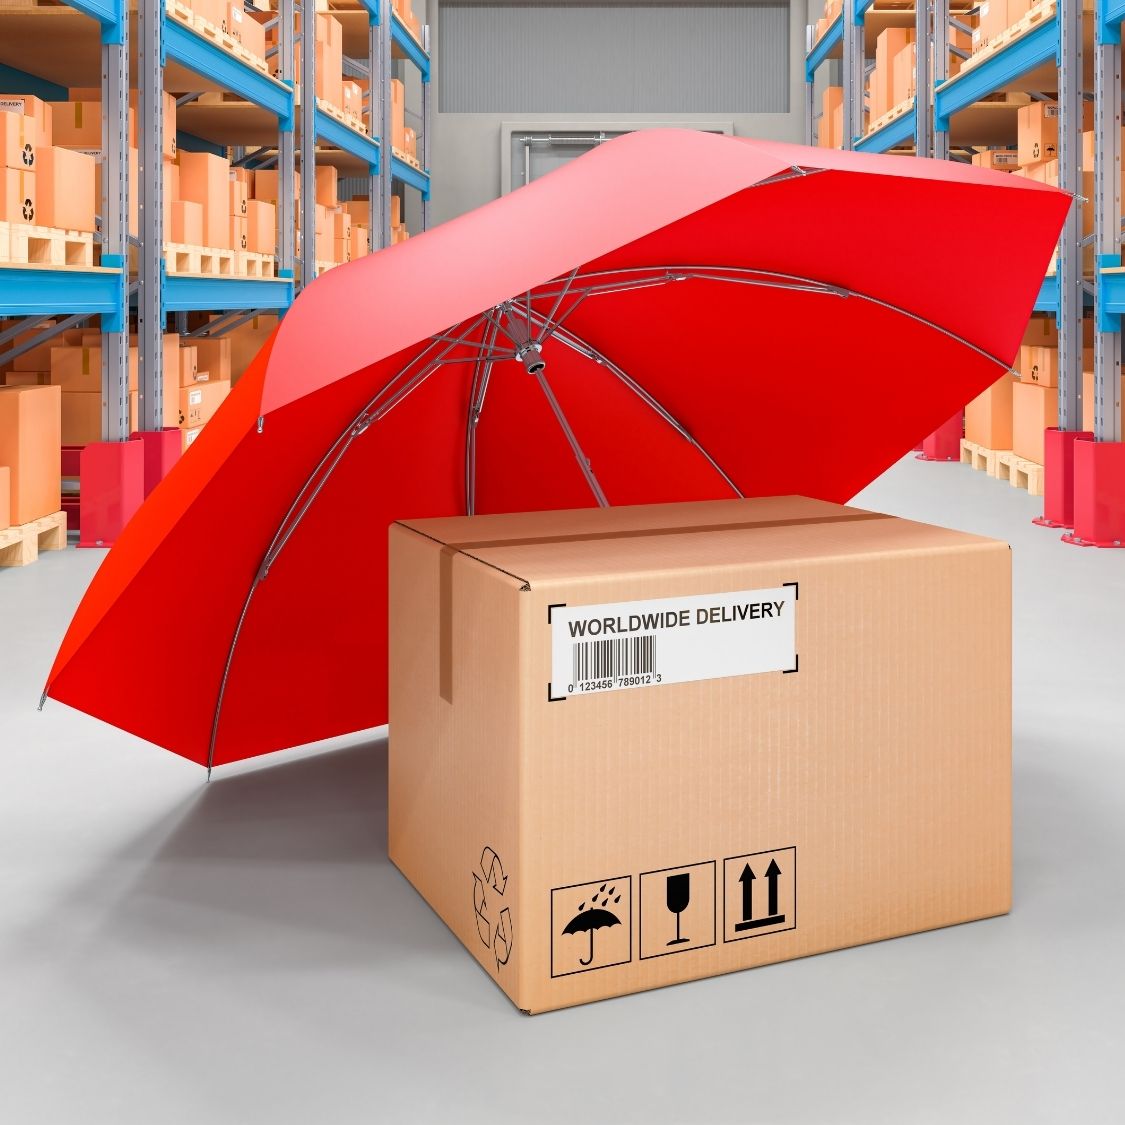 What Are the Different Types of Cargo Insurance?